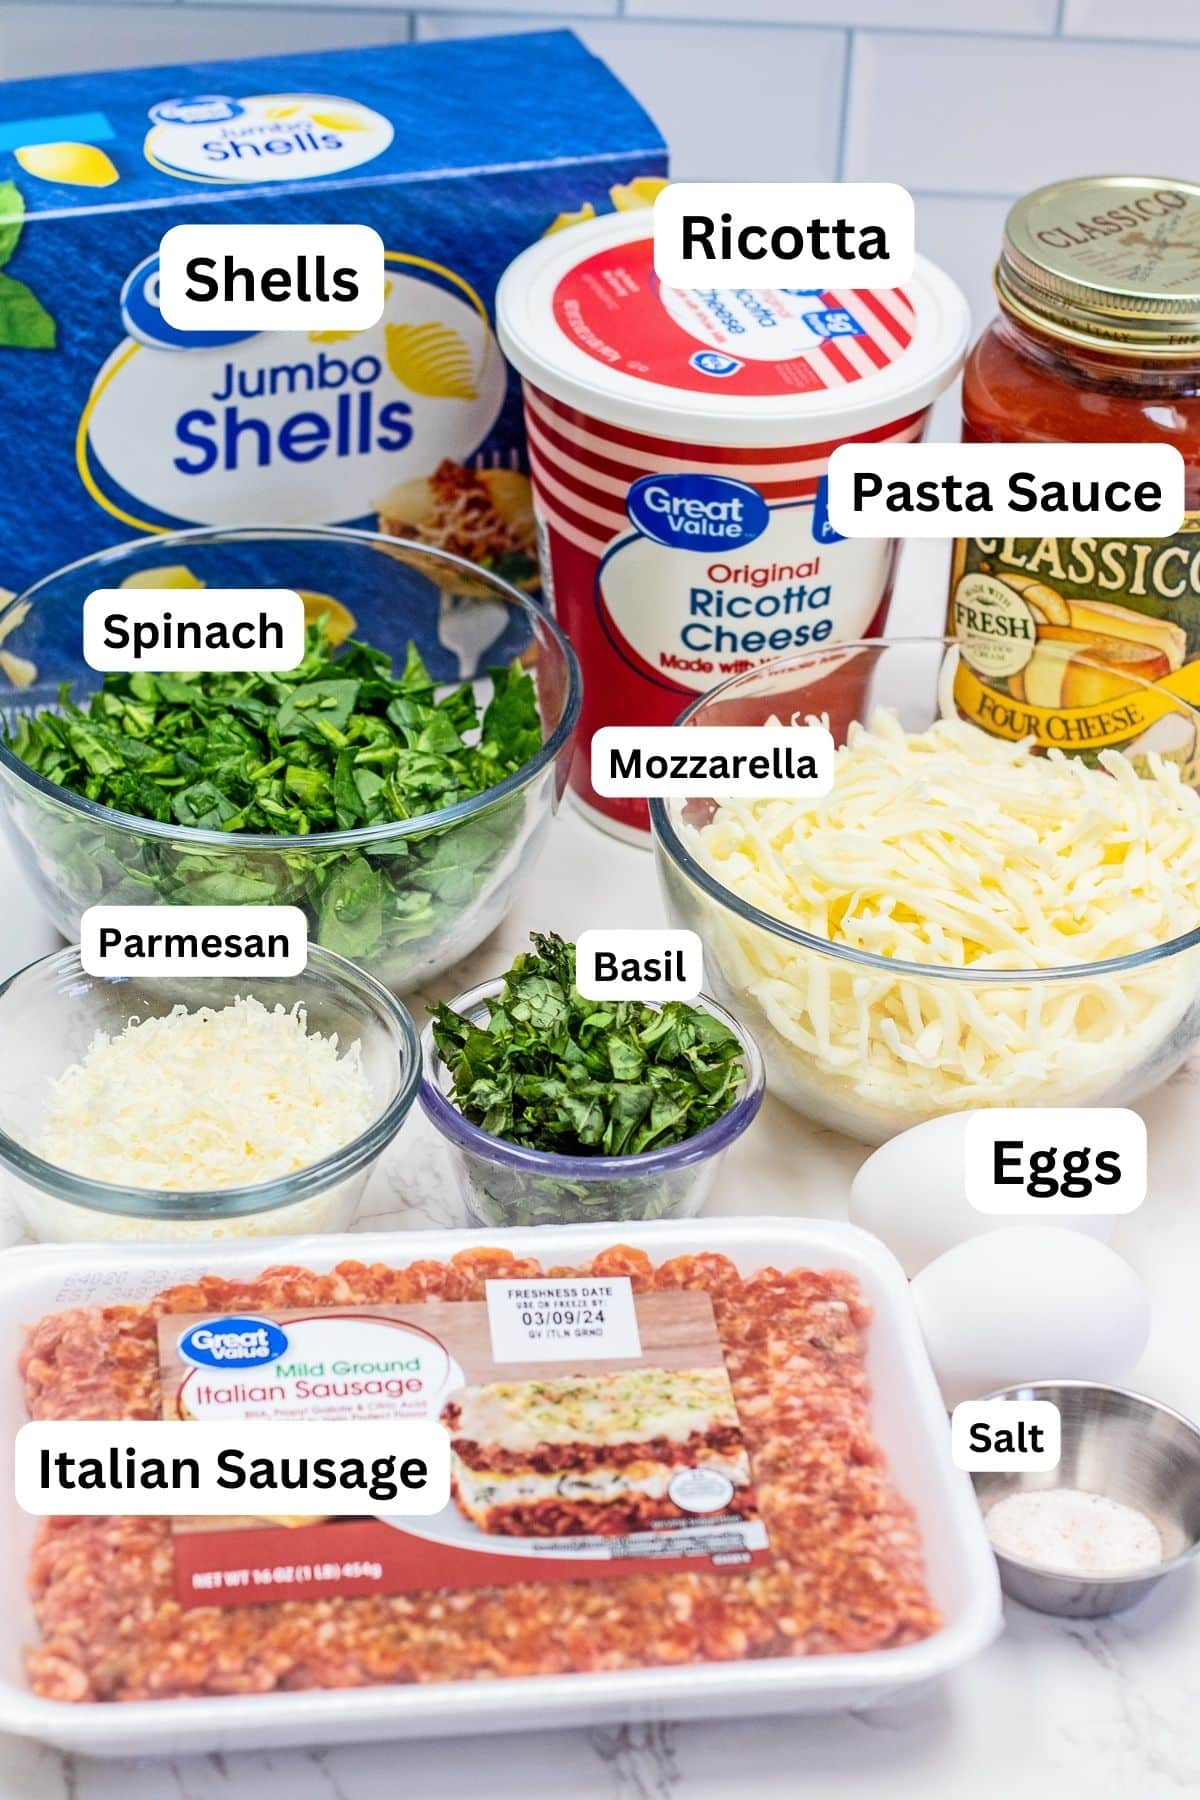 Stuffed shells with spinach and Italian sausage ingredients measured out with labels.